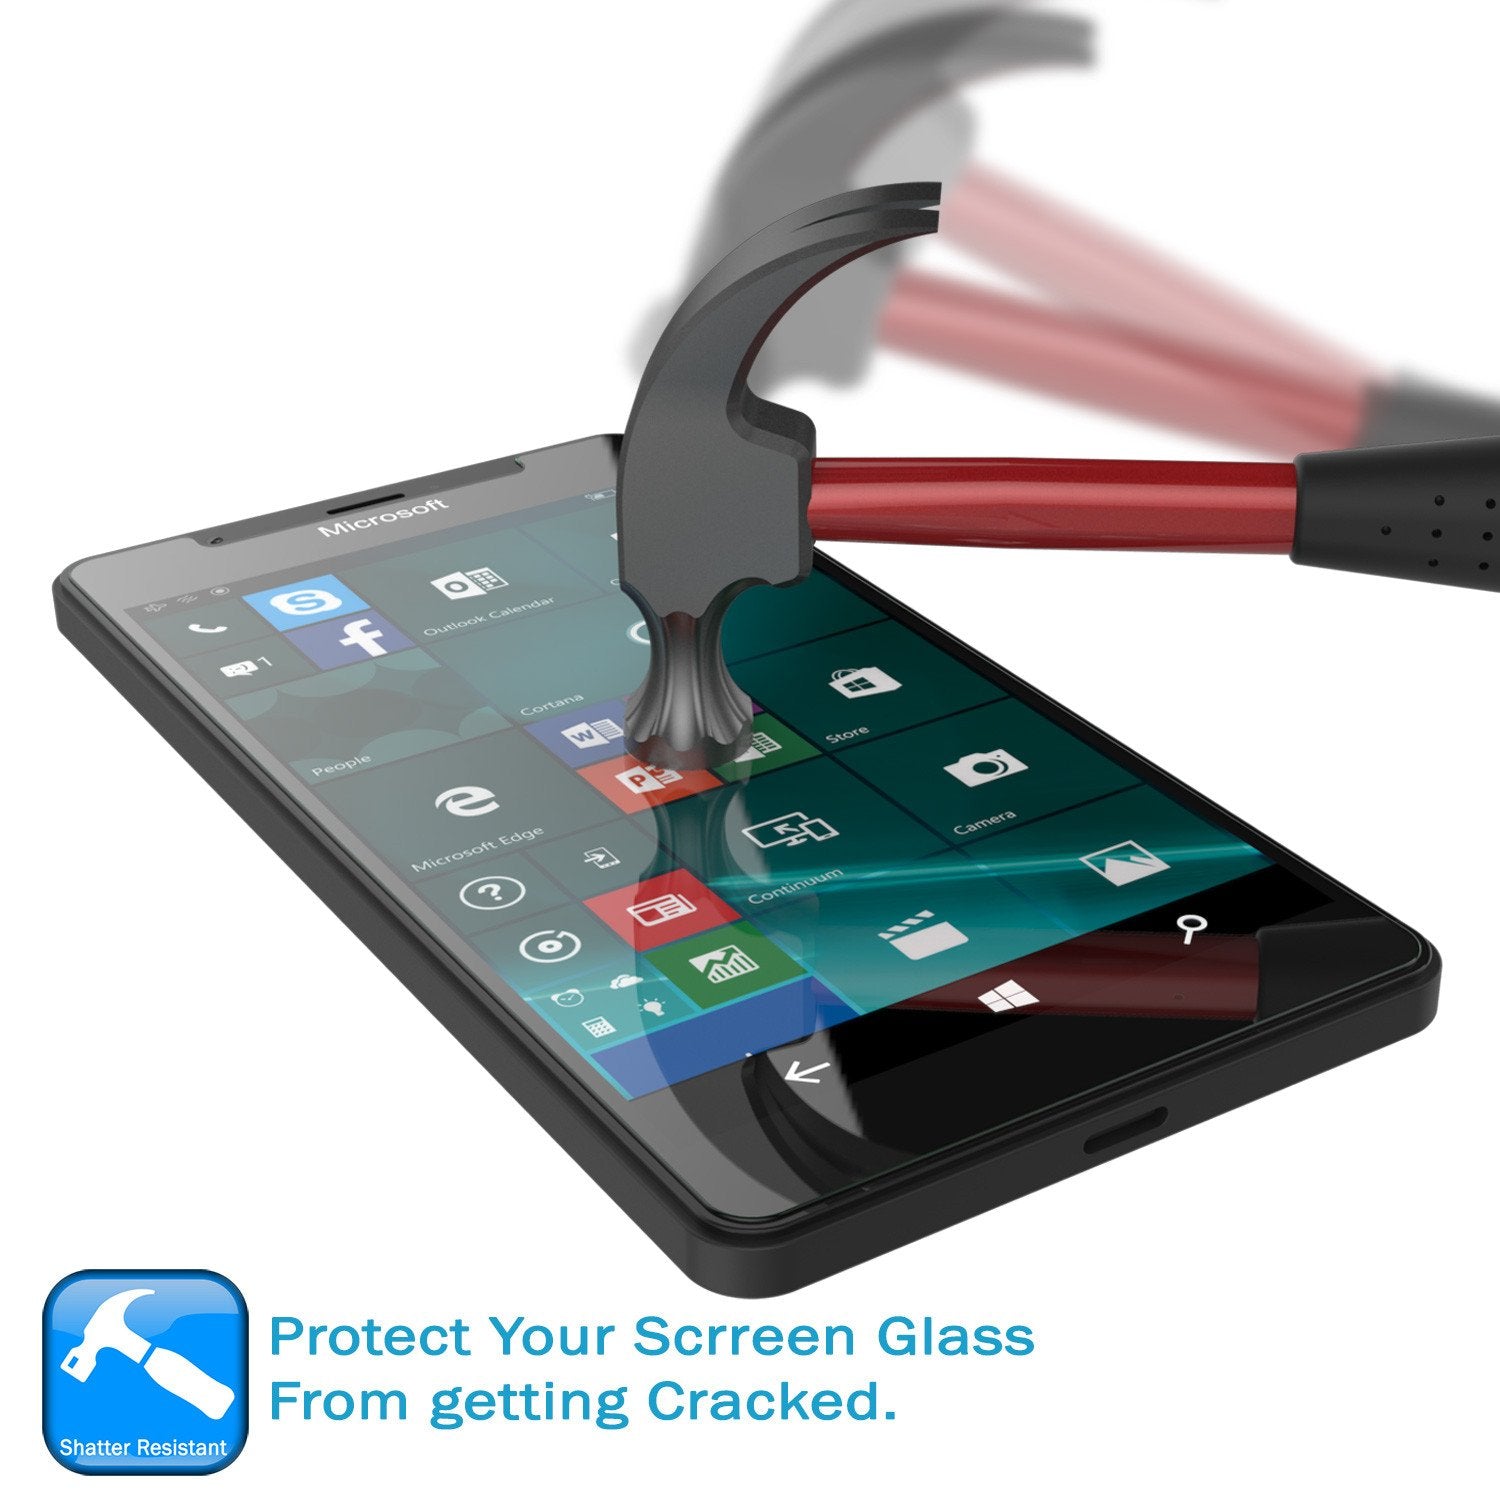 Microsoft Lumia 950 XL Screen Protector, Punkcase SHIELD Tempered Glass Protector 0.33mm Thick 9H